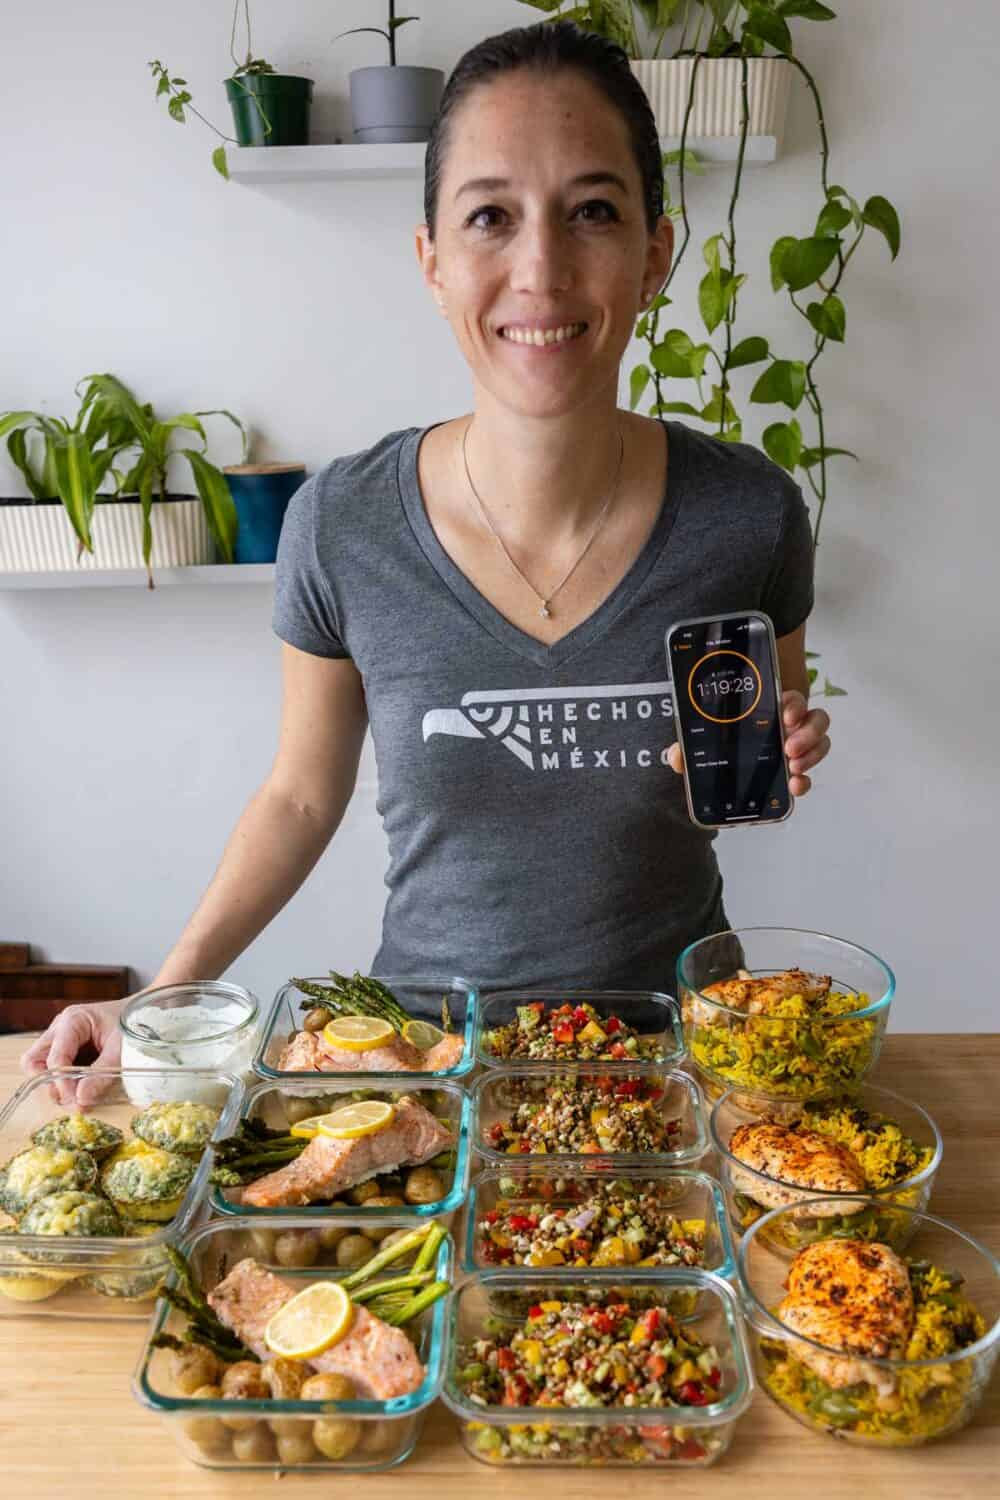 Woman standing behind 15 healthy meals in meal prep containers holding a phone reading 1:19:28.